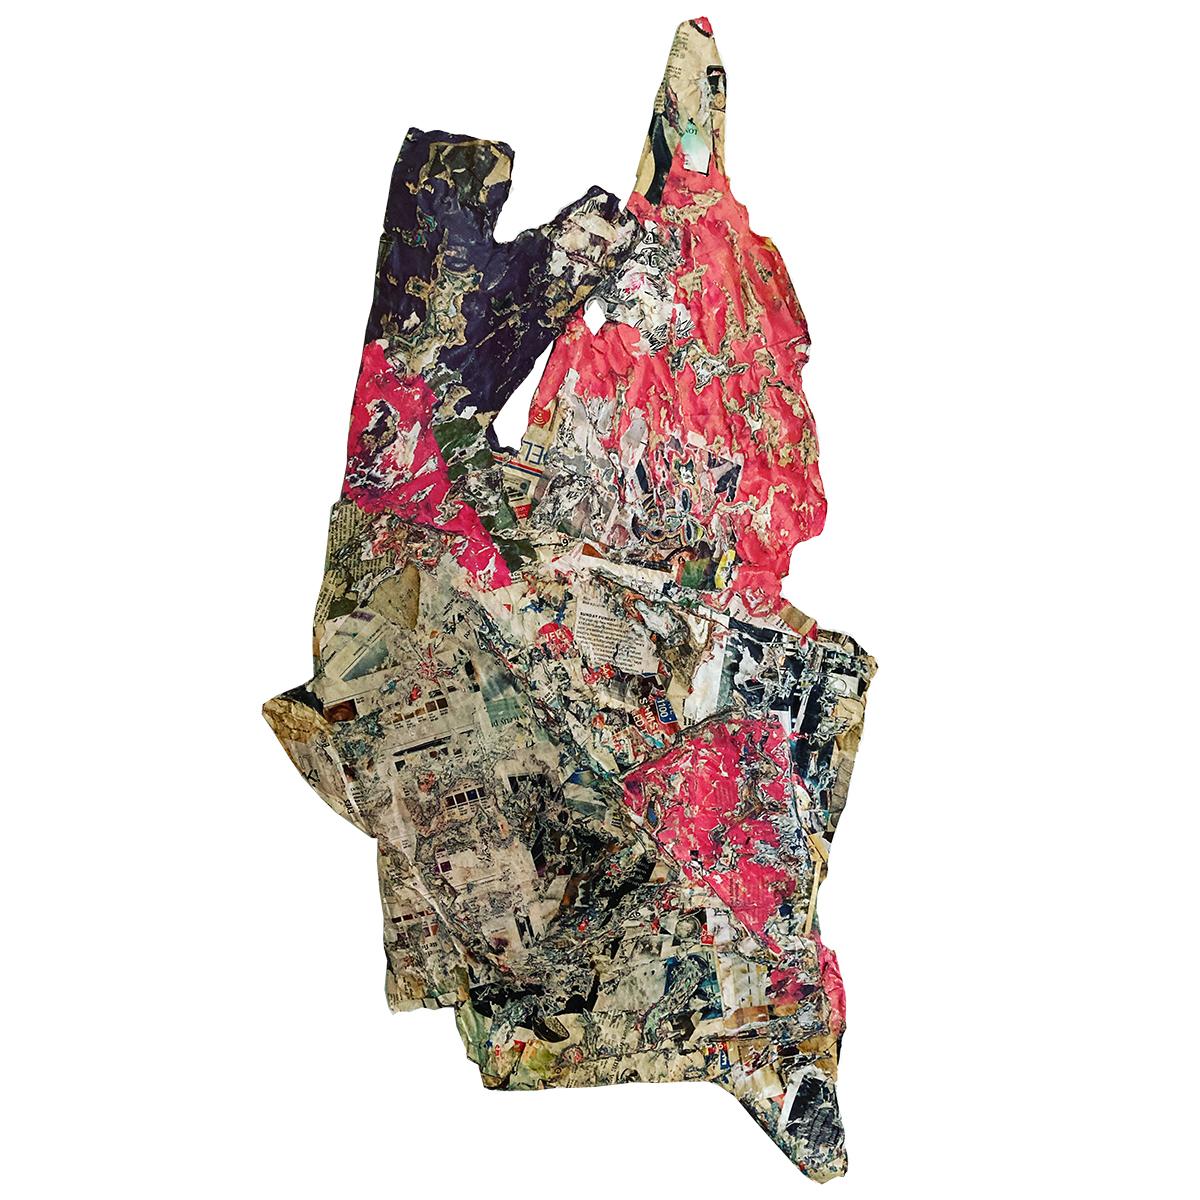 Brent Fogt Abstract Sculpture - "High Plains" Red and Dark Purple Abstract Mixed Media Sculptural Collage